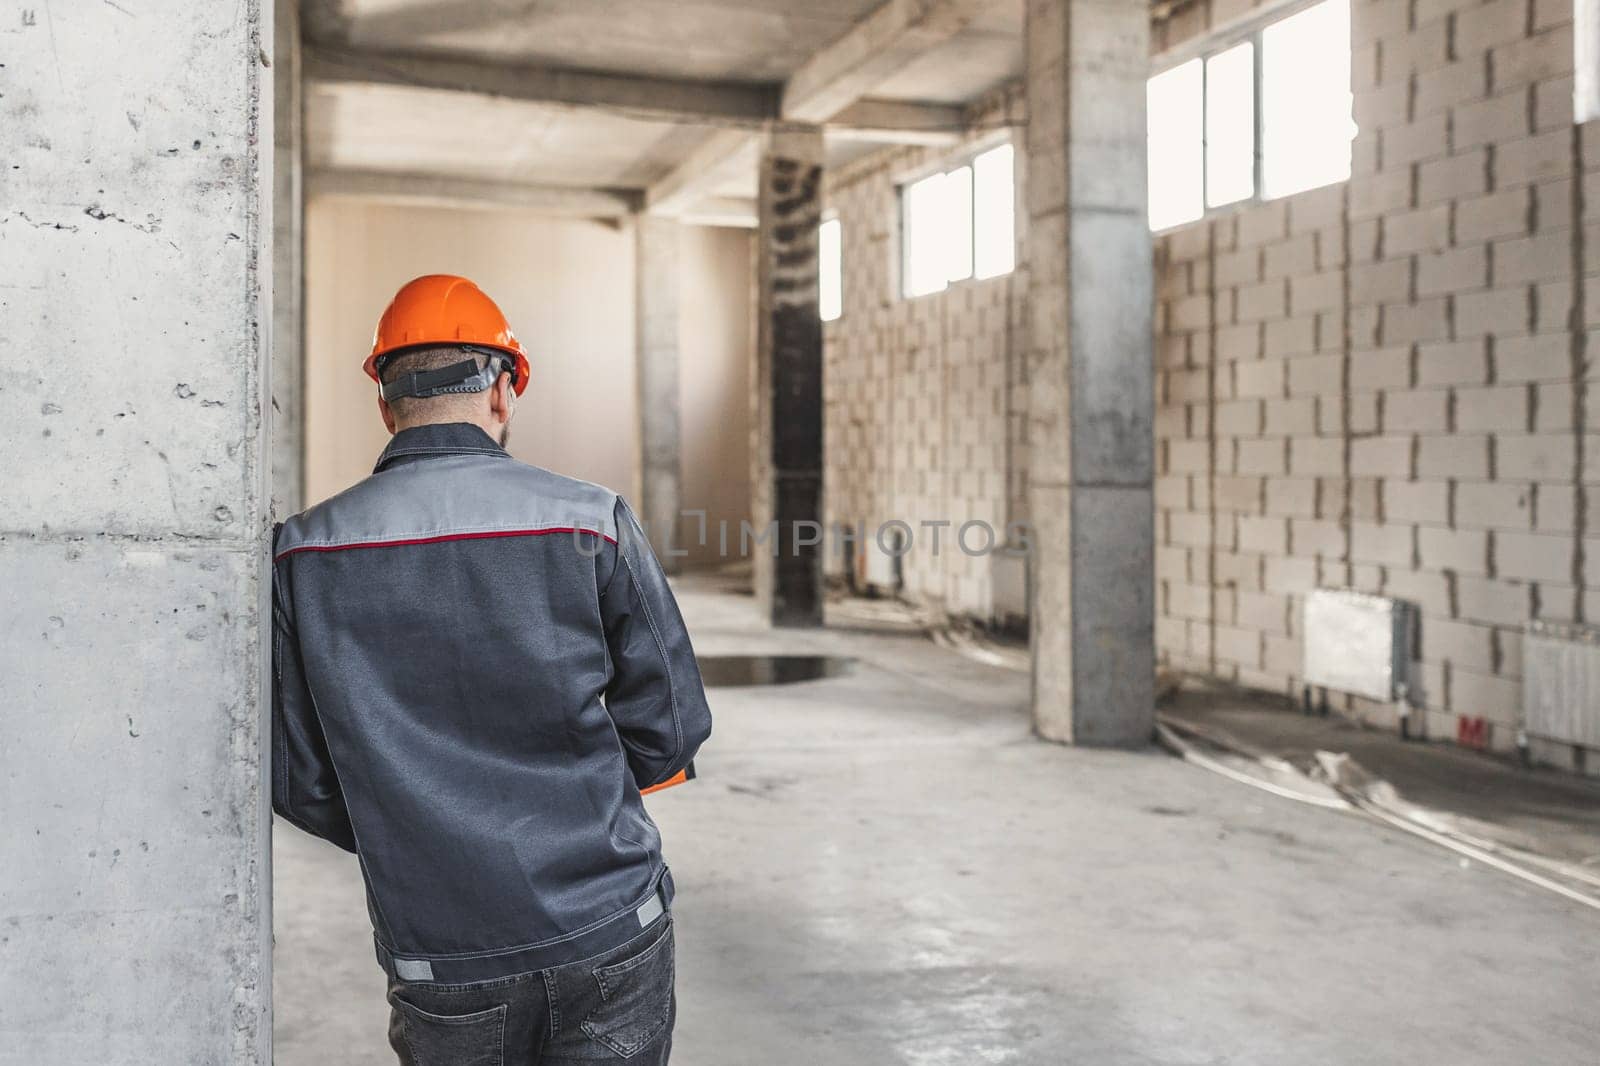 A construction worker in a helmet stands with his back to the camera, leaning on a reinforced concrete structure, thinking about something, copy space.